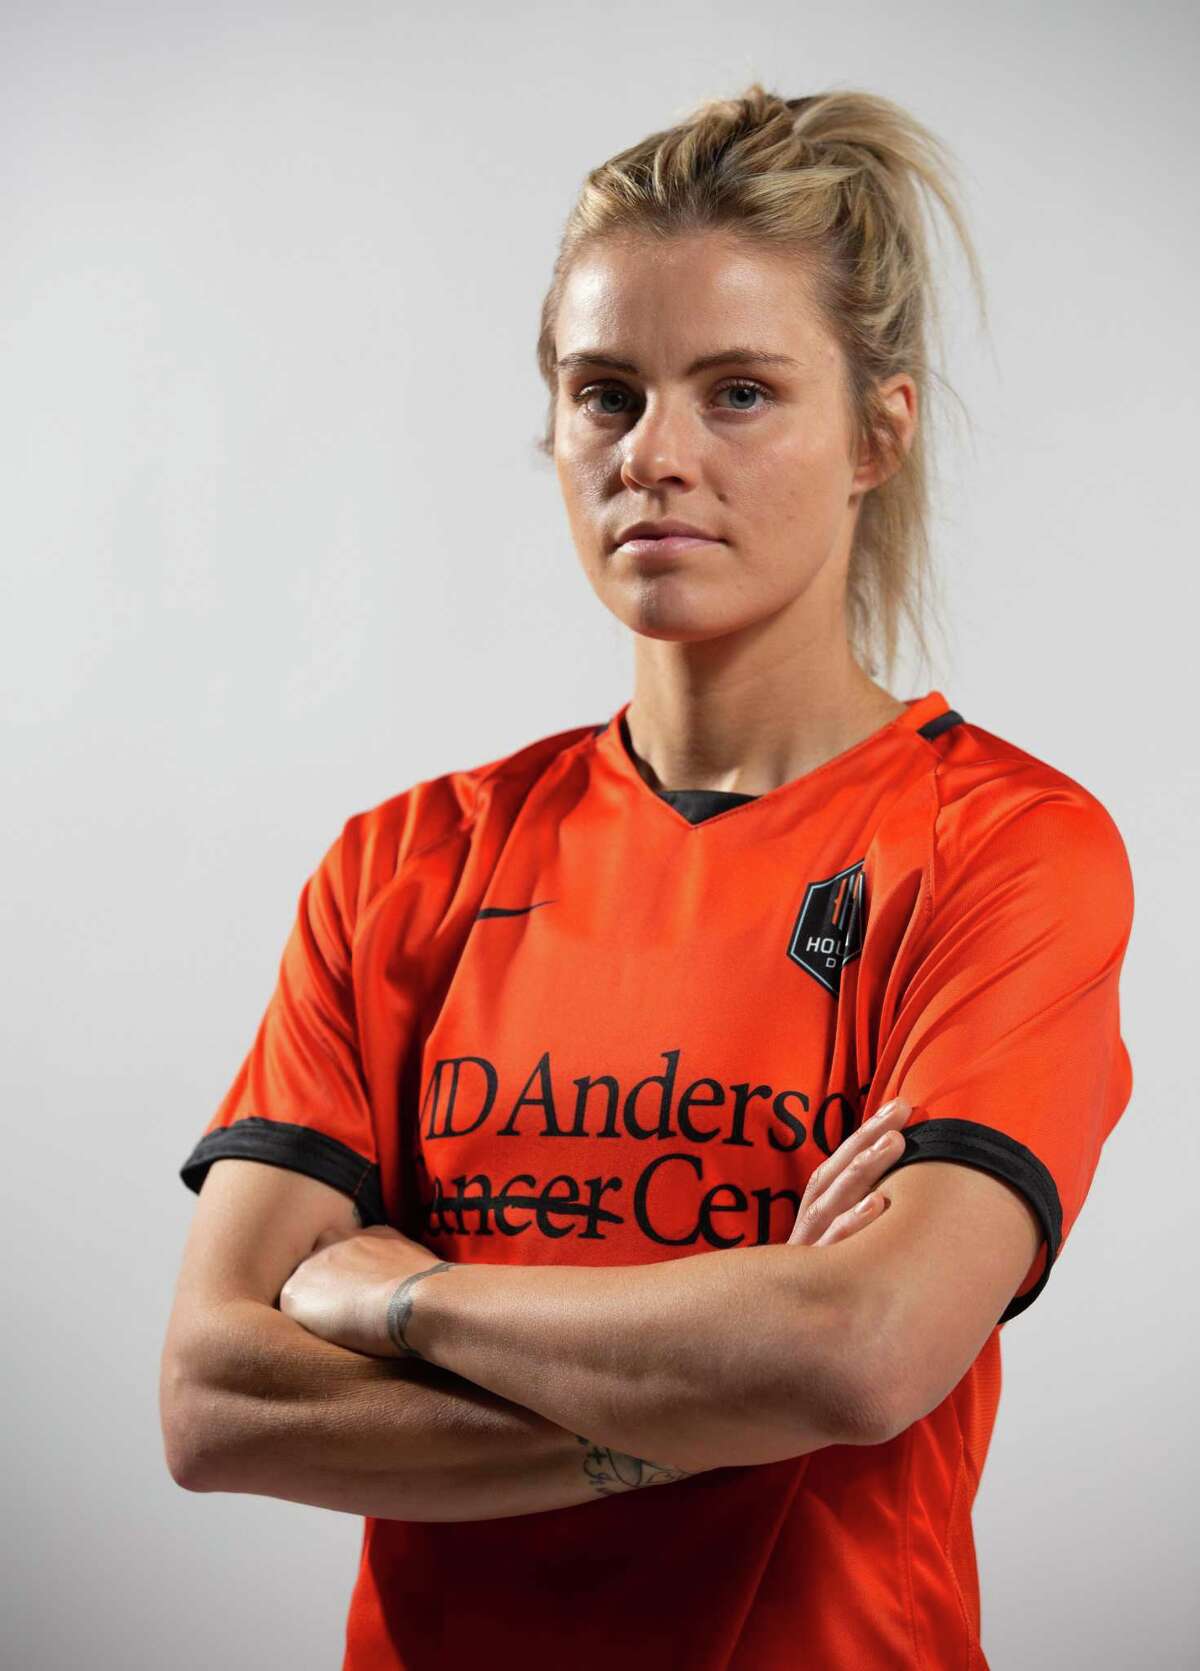 Houston Dash forward Rachel Daly poses for a photo on media day Wednesday, March 9, 2022, in Houston.